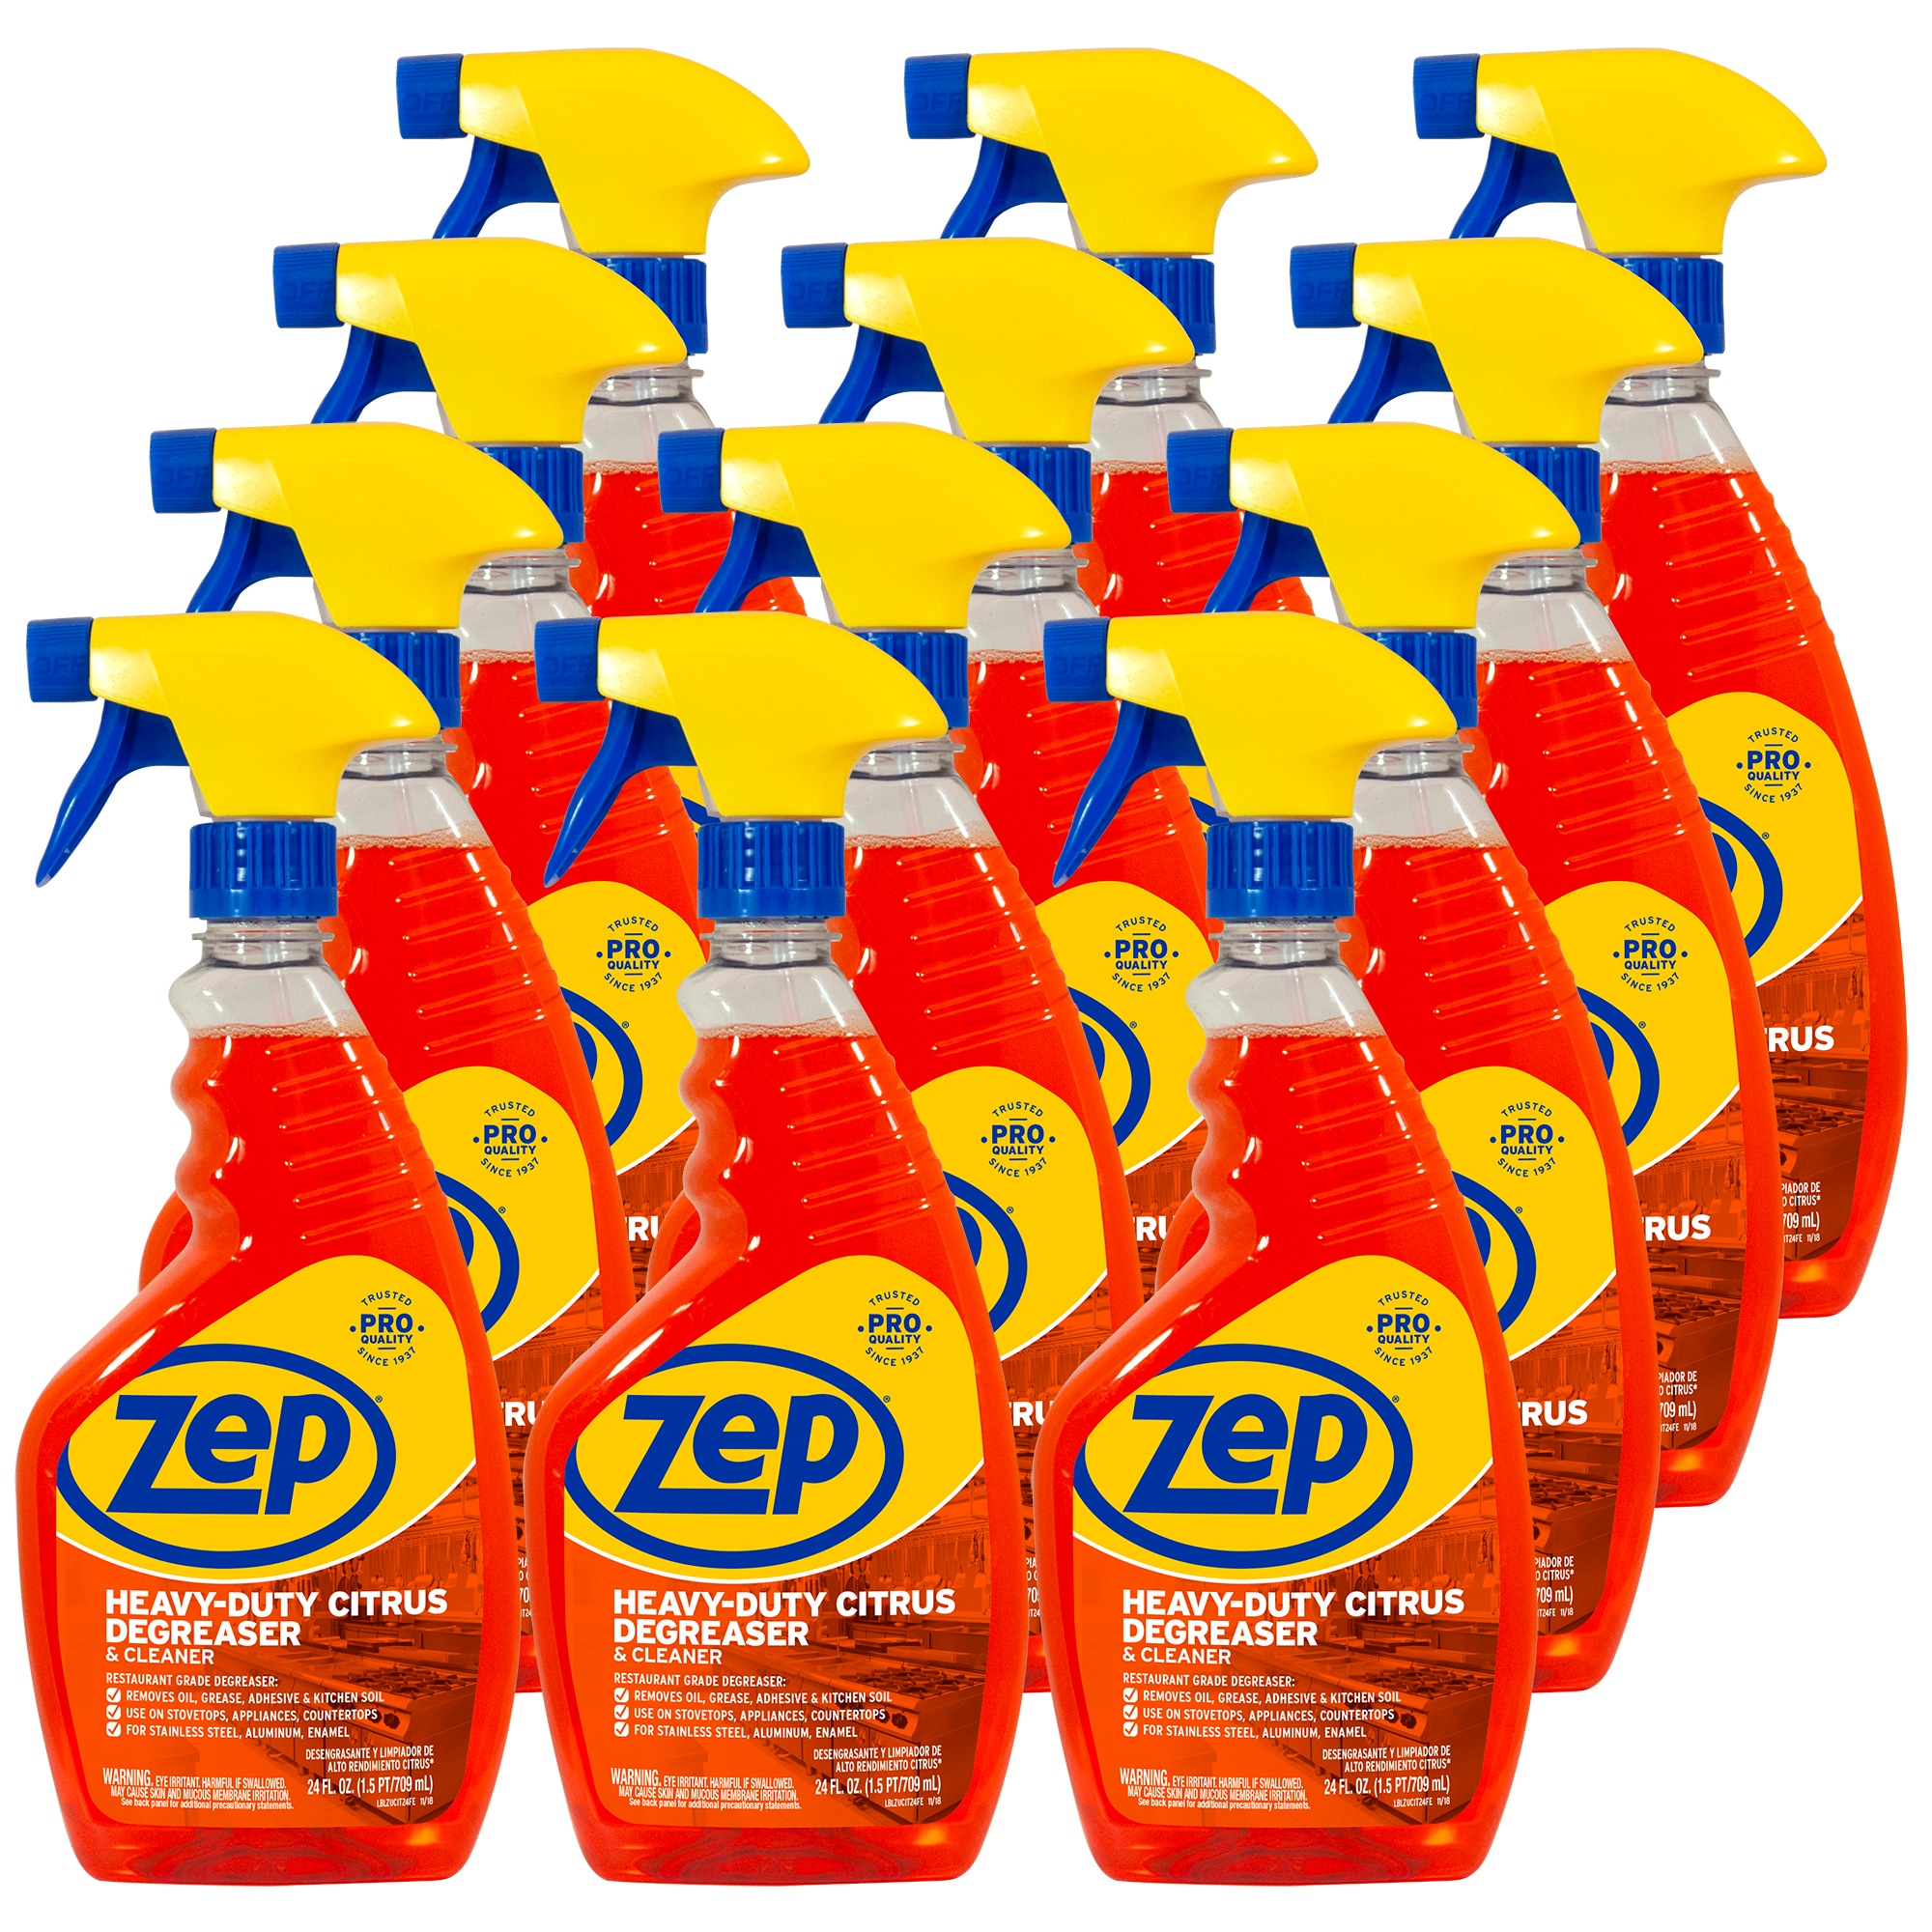 Fast 505 Cleaner and Degreaser 32 oz. 2 Pack by Zep